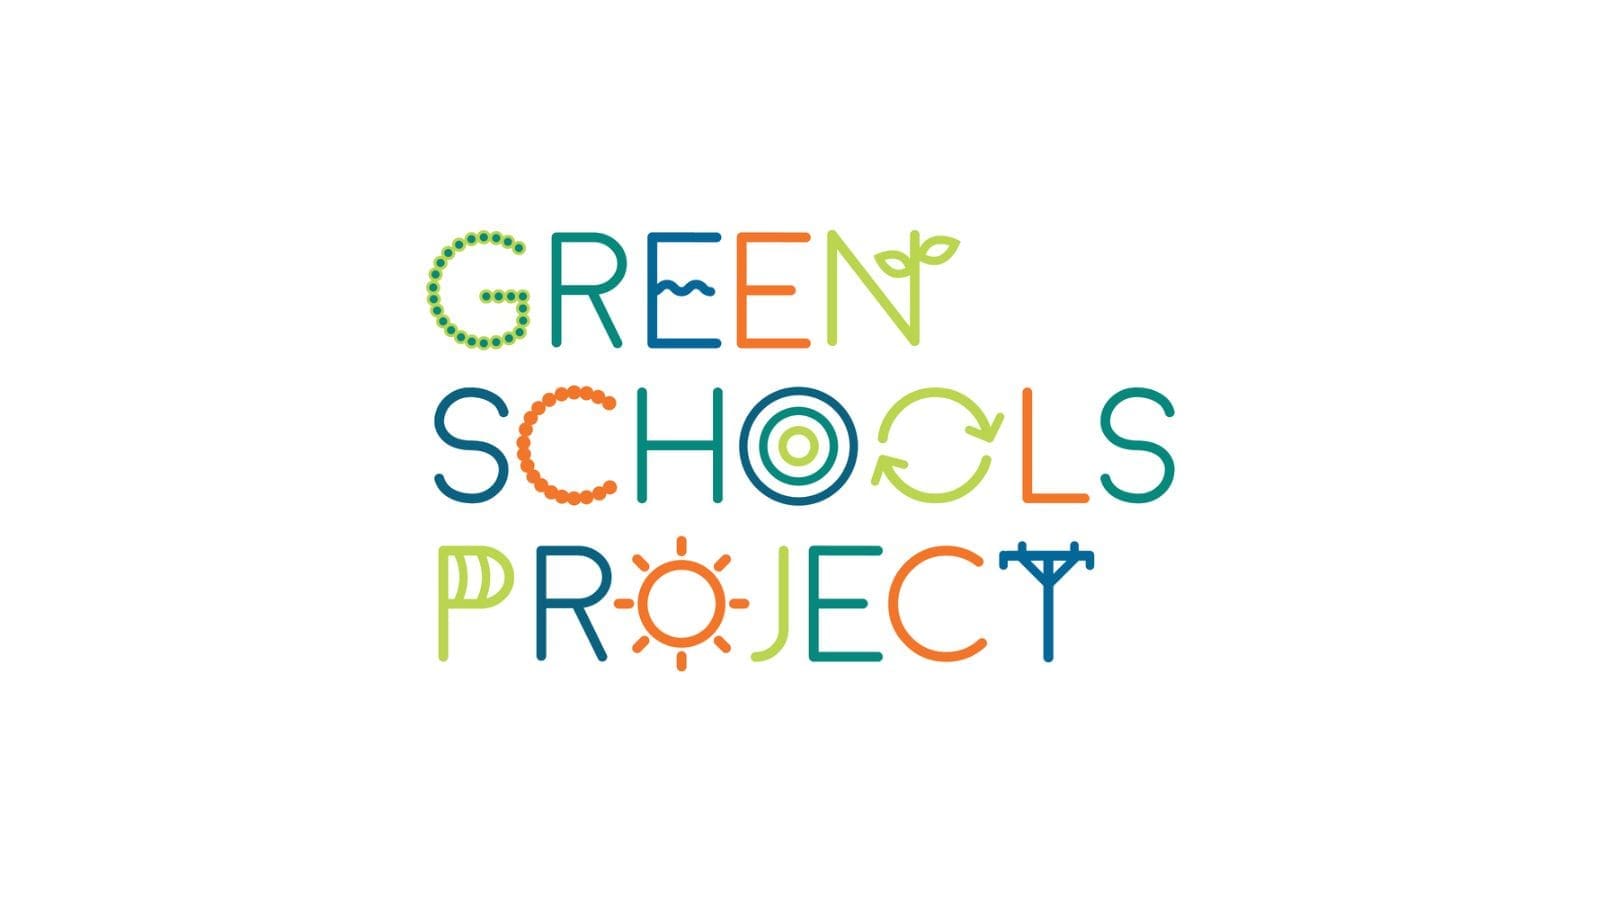 The words "Green Schools project" with all of the letters in either green, blue, orange or turquoise. Some of the letters are replaced with objects, with the "T" instead being a telegraph poll and the "O" being a sun.